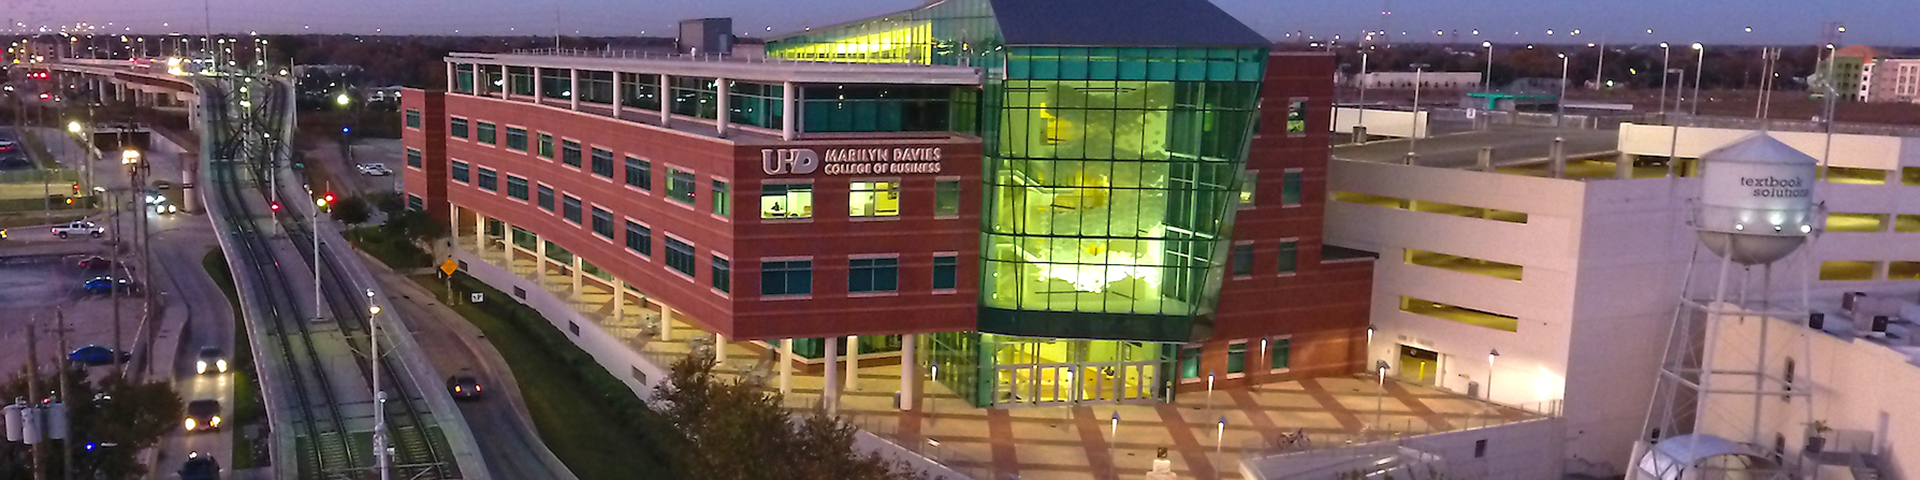 Aerial view of Marilyn Davies College of Business building